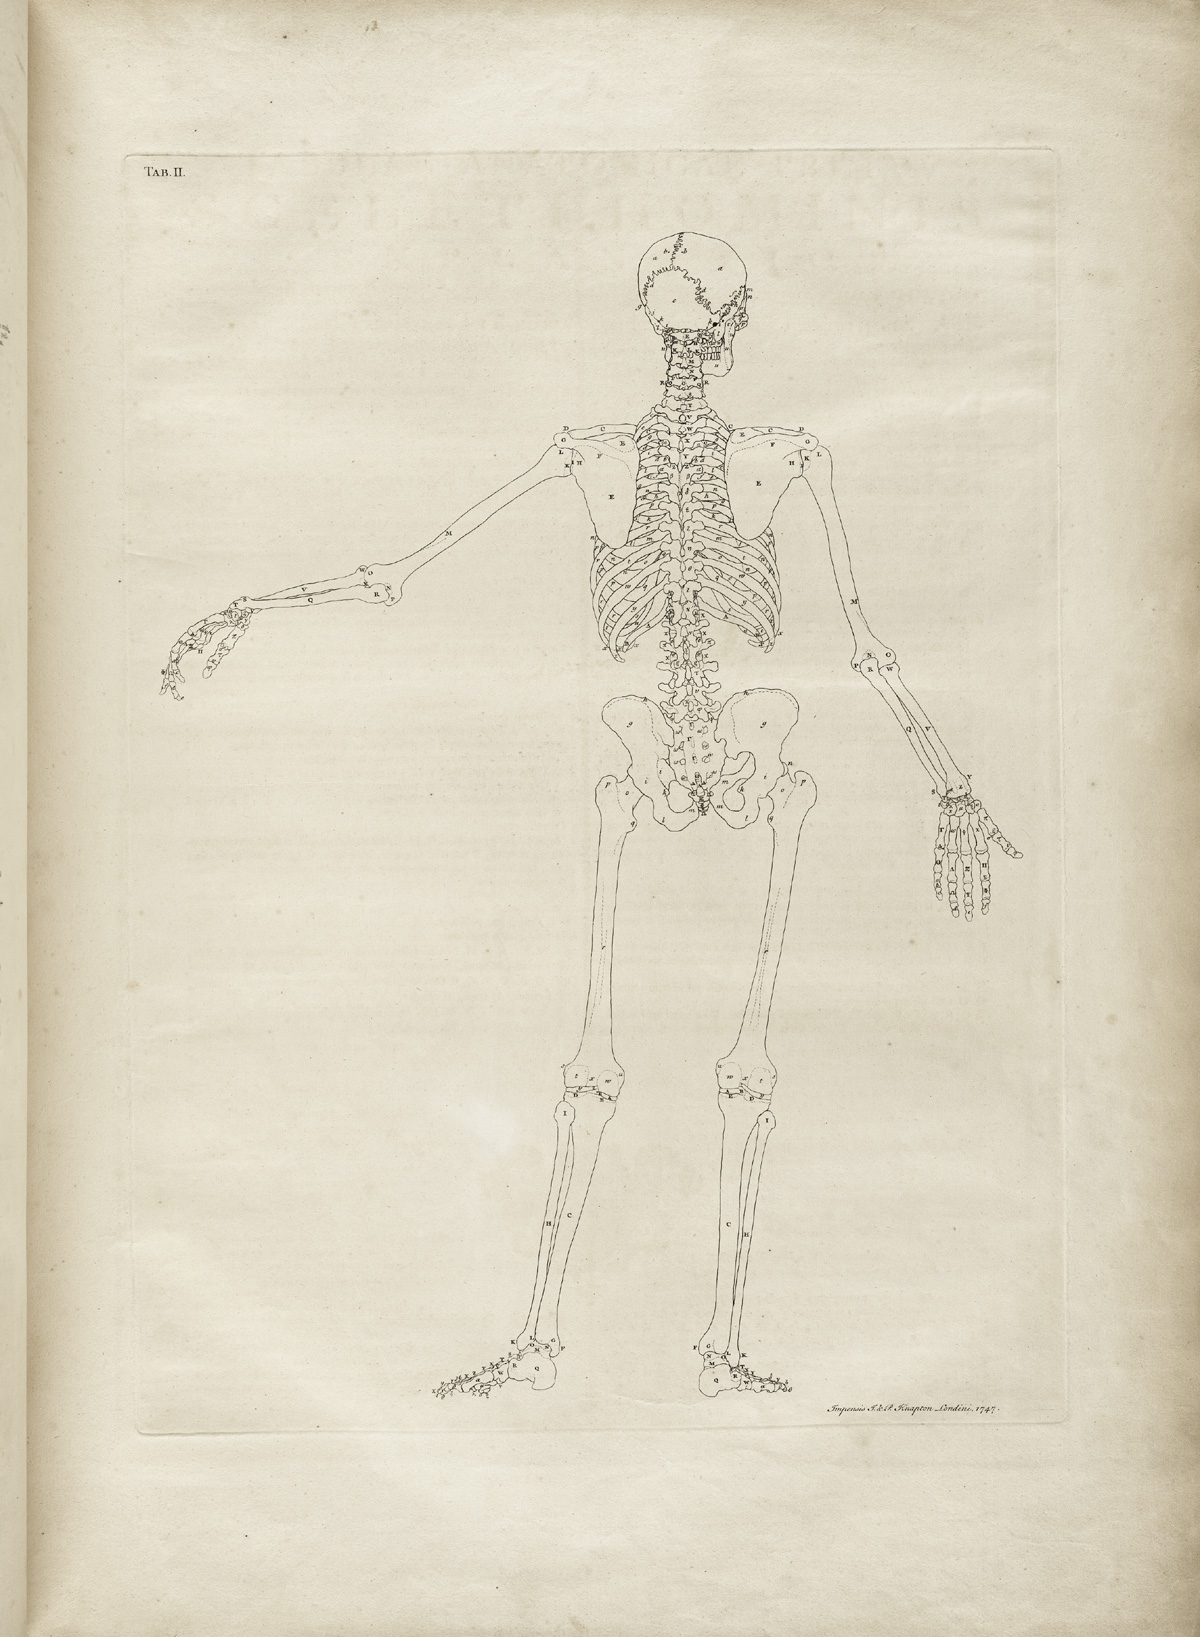 Table 2 of Bernhard Siegfried Albinus' Tabulae sceleti et musculorum corporis humani, featuring a full length posterior view of a annotated skeleton with its left arm is extended.